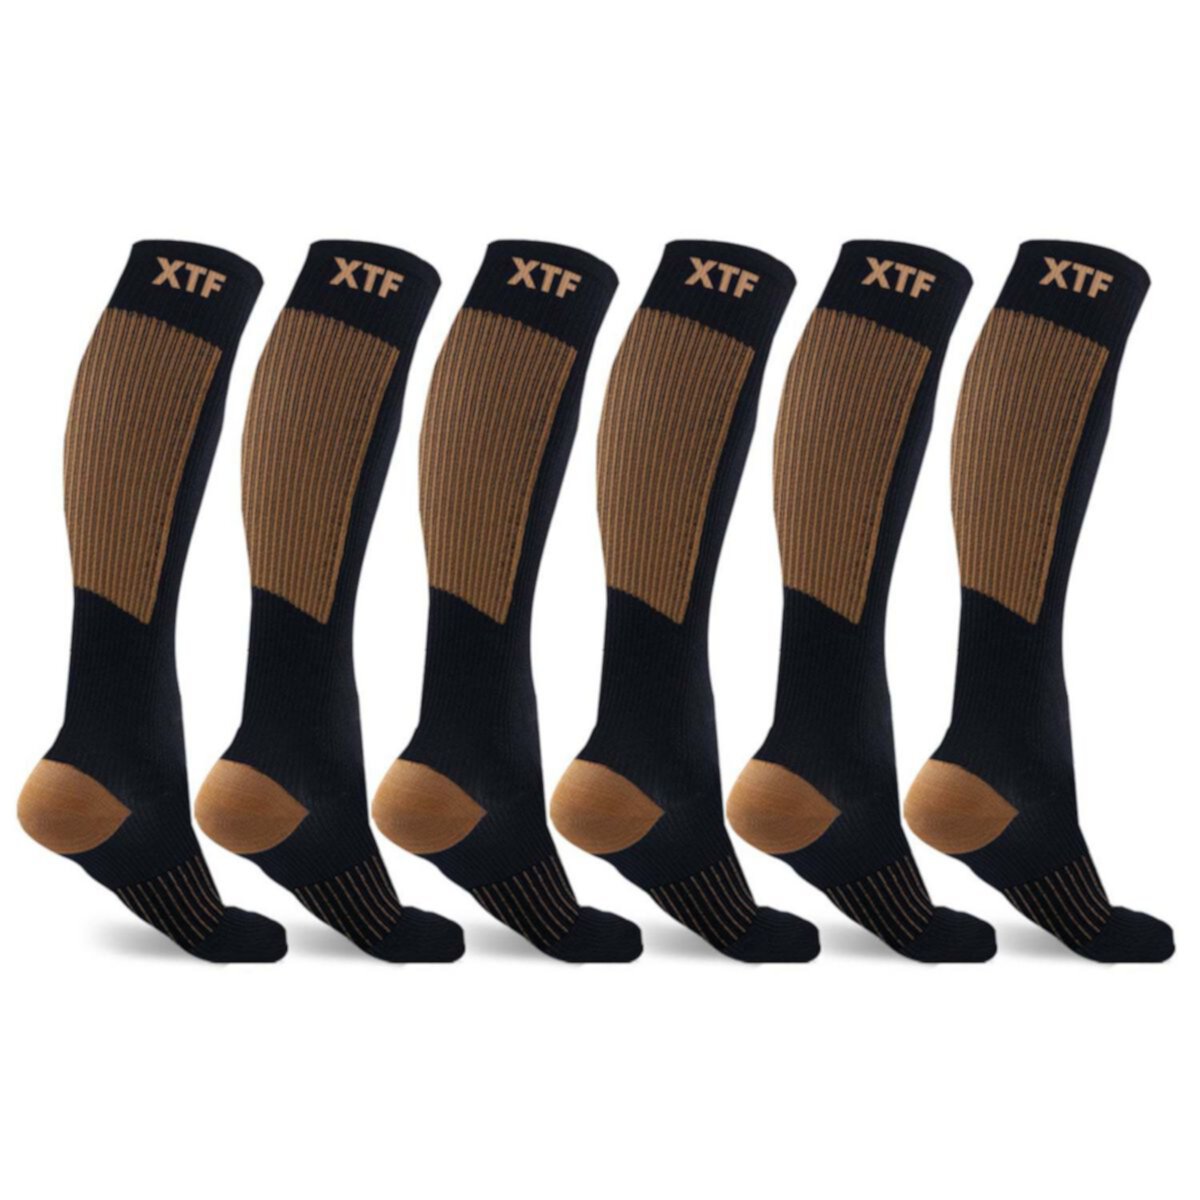 Copper Compression Socks - 6 Pair Extreme Fit